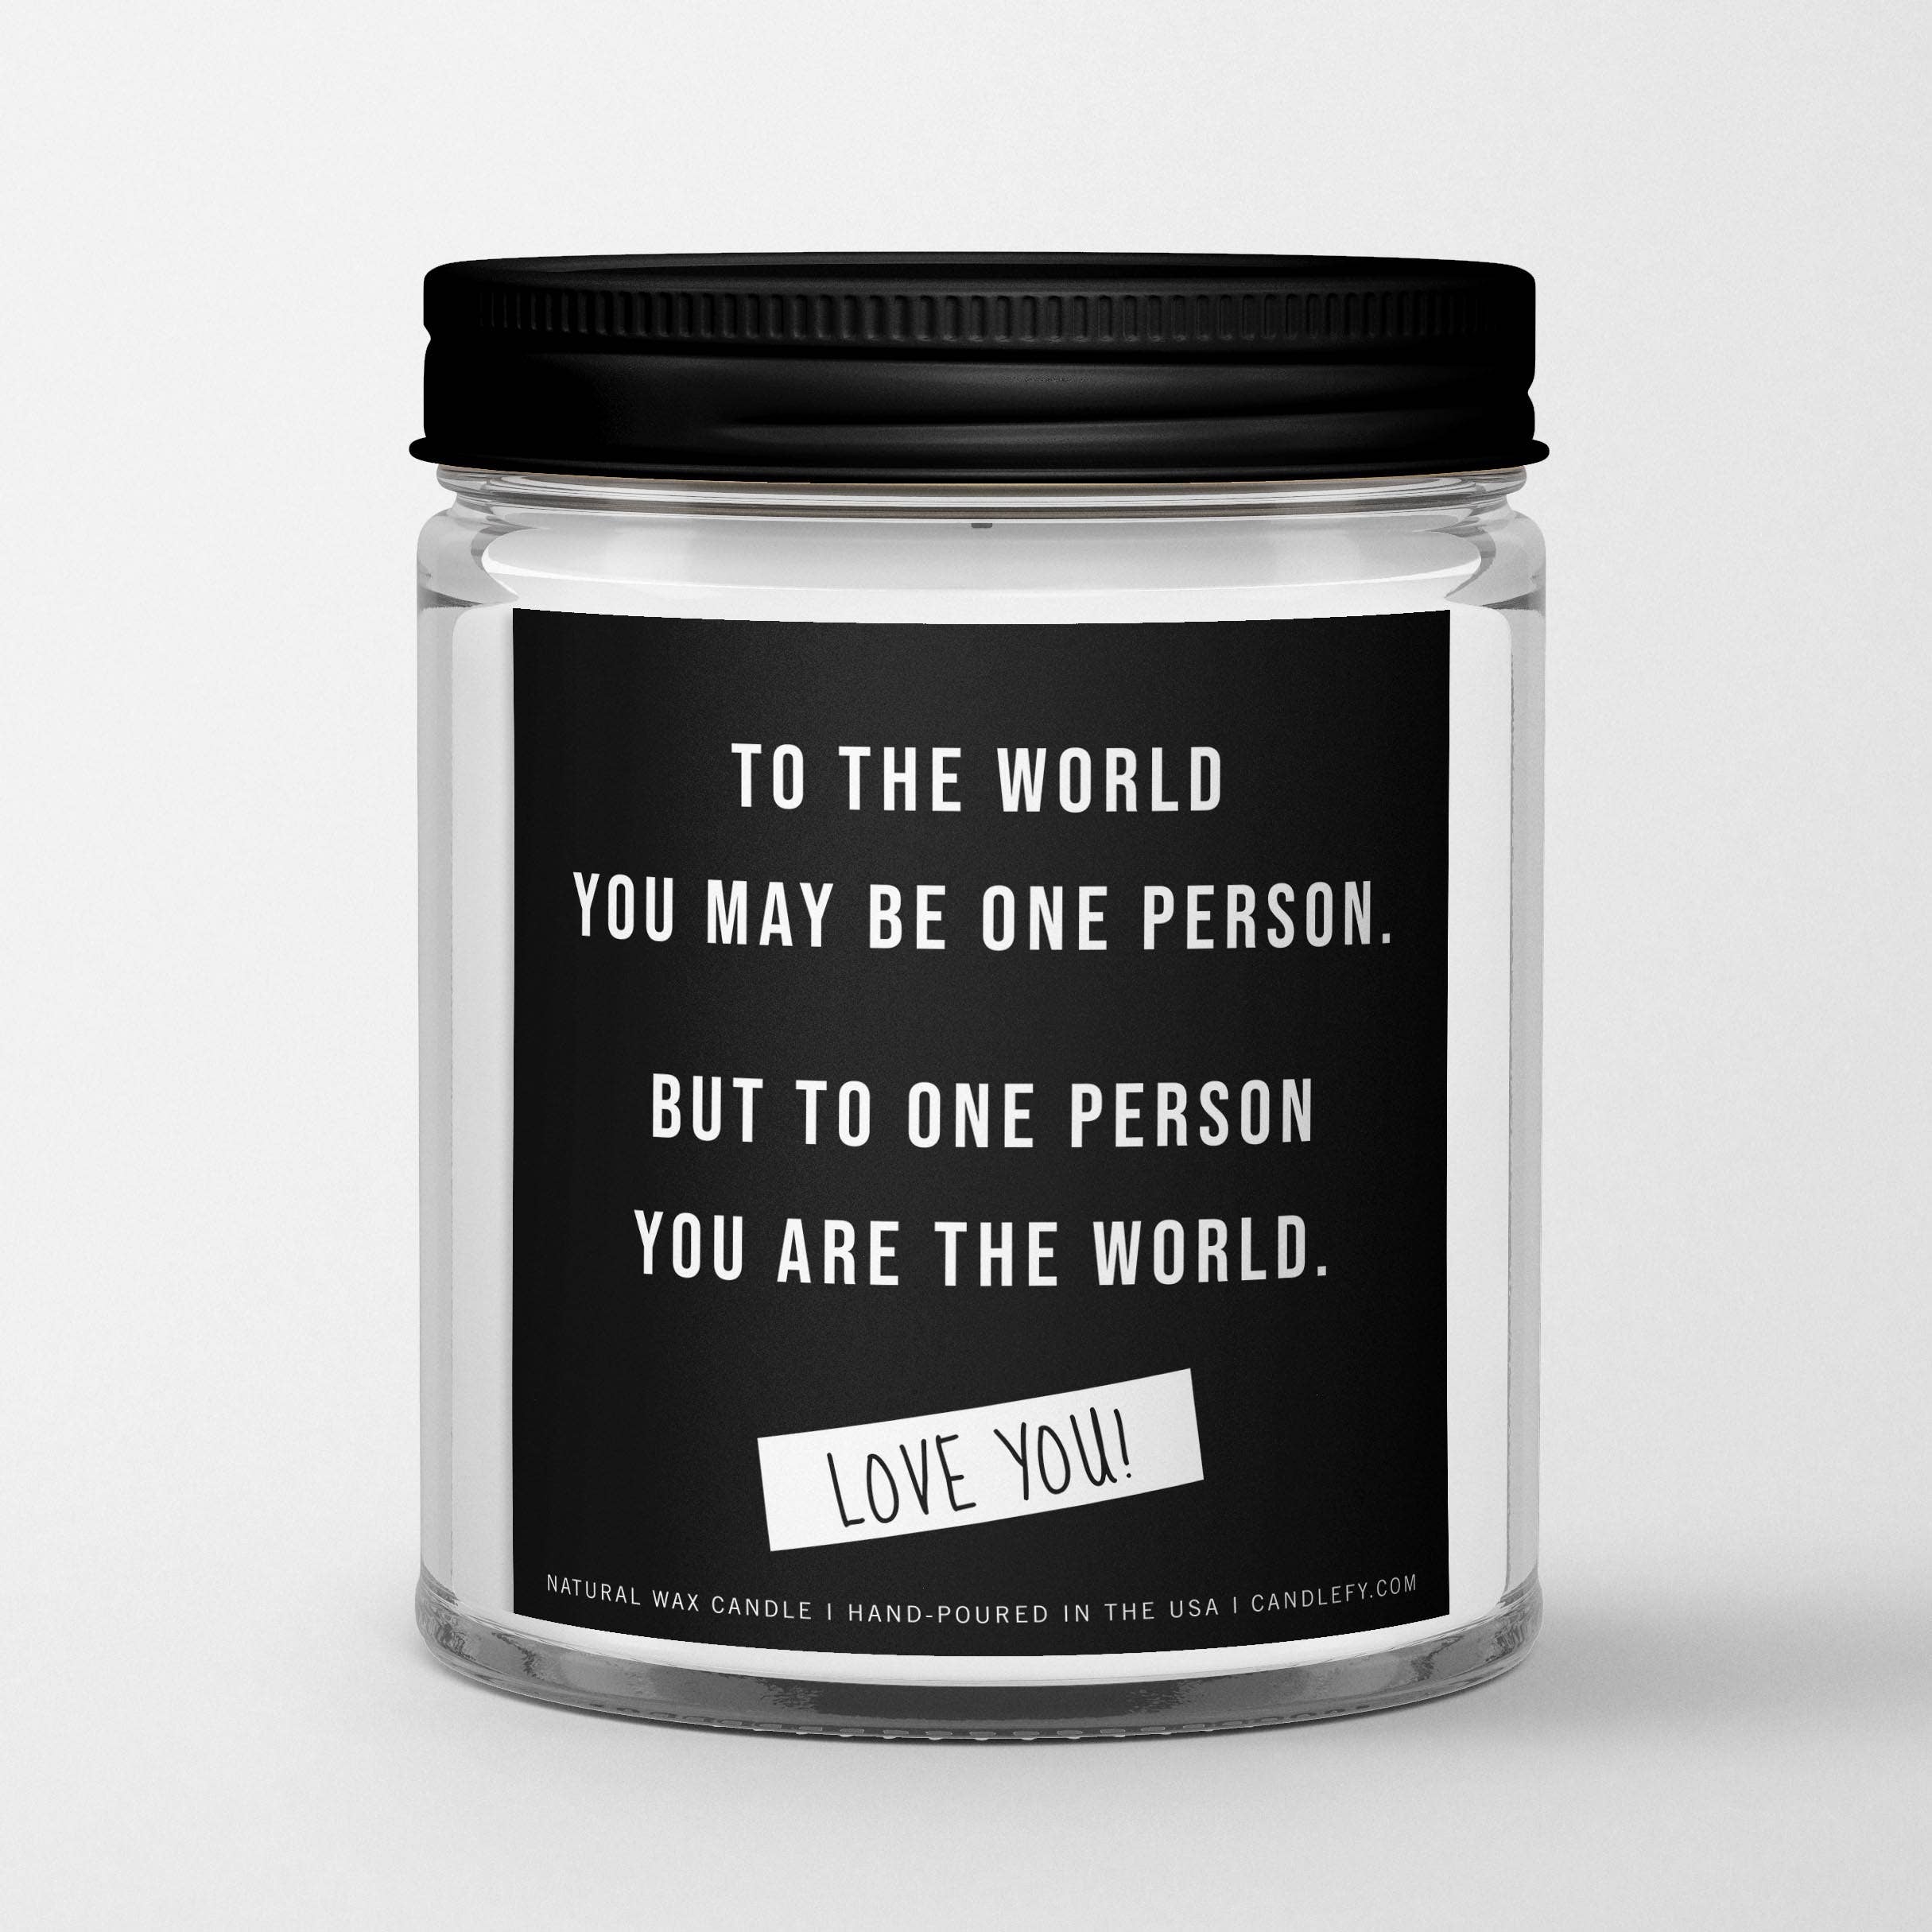 Candlefy - Inspirational Quote Candle: To the world you may be 1 person (7799001088227)